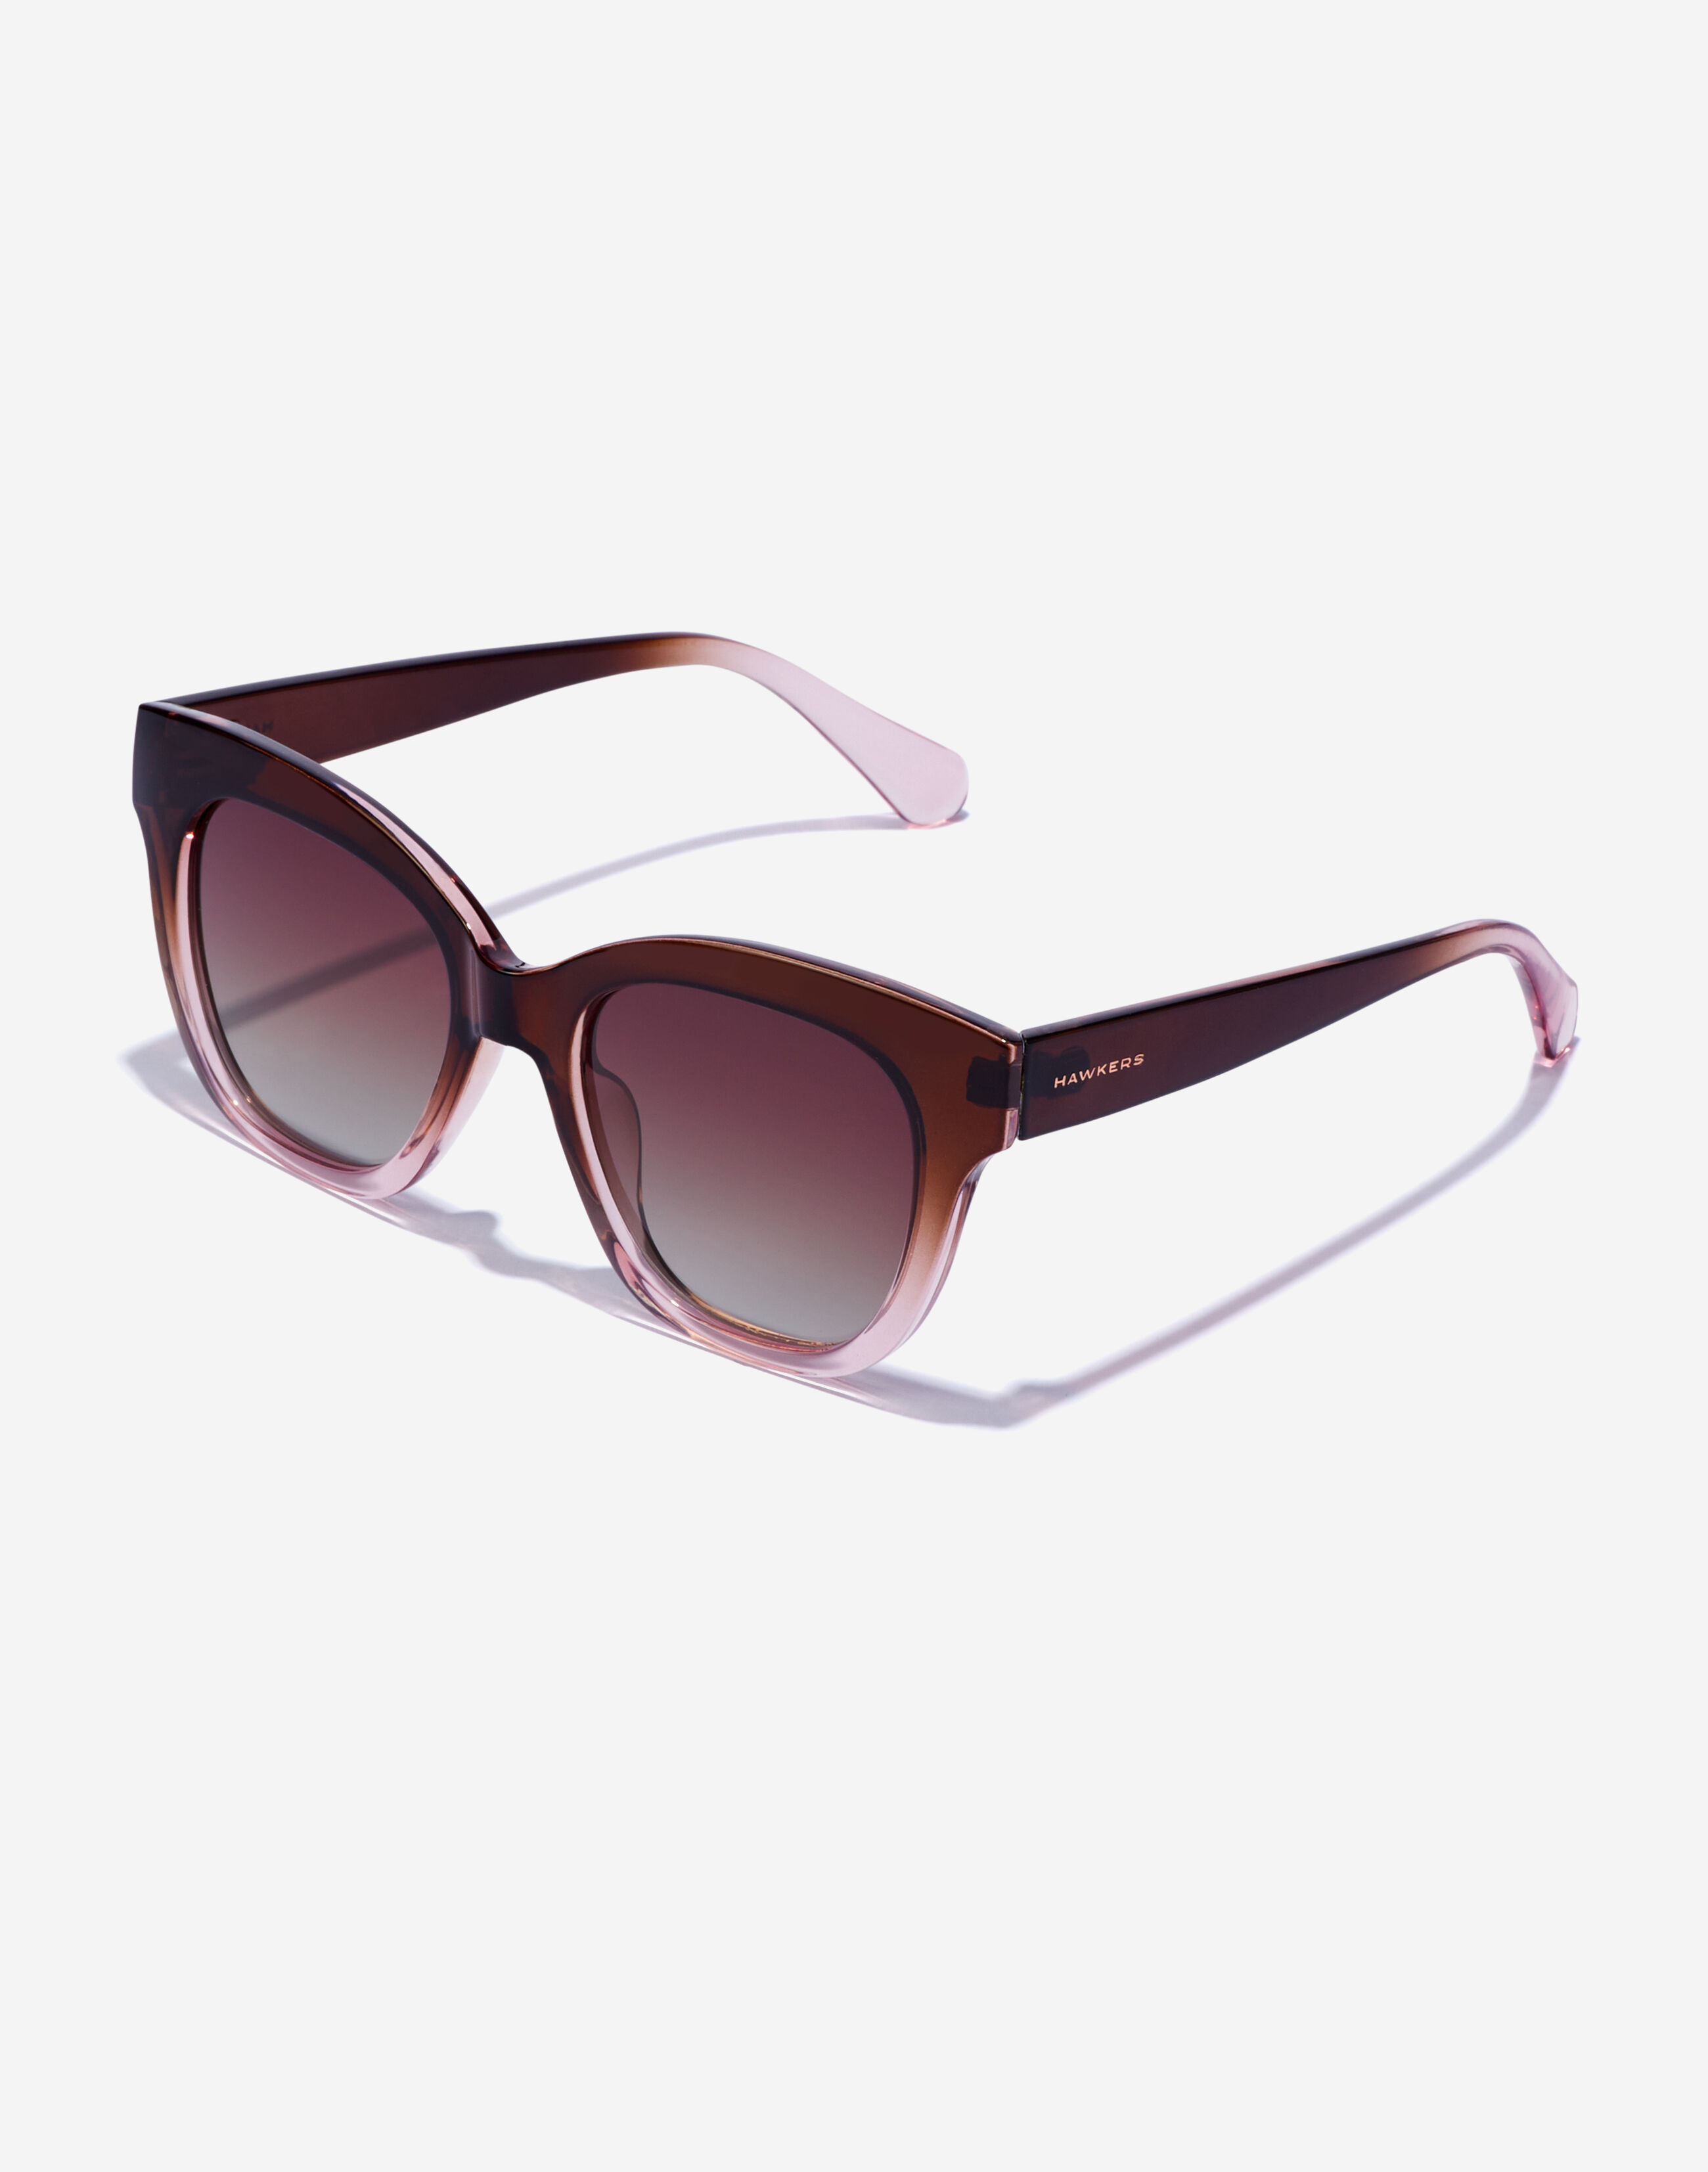 Buy Unisex Polarized Sunglasses Online | Hawkers USA® Official Store